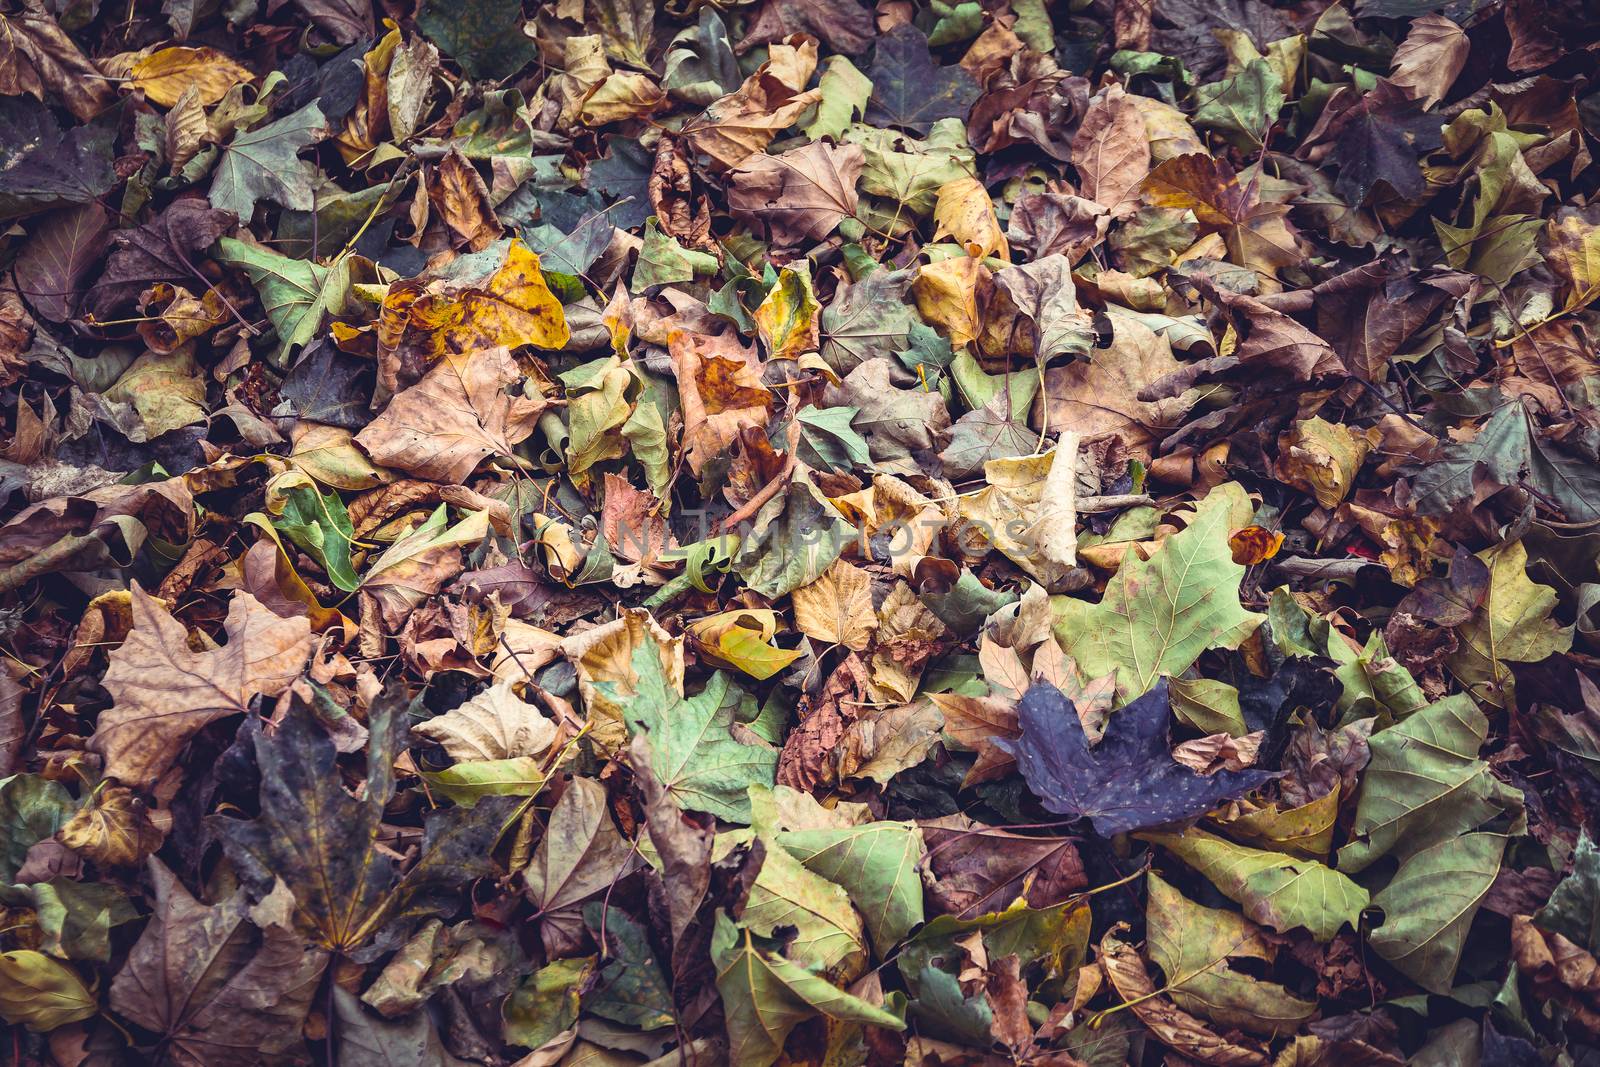 Carpet of autumn leaves by magicbones